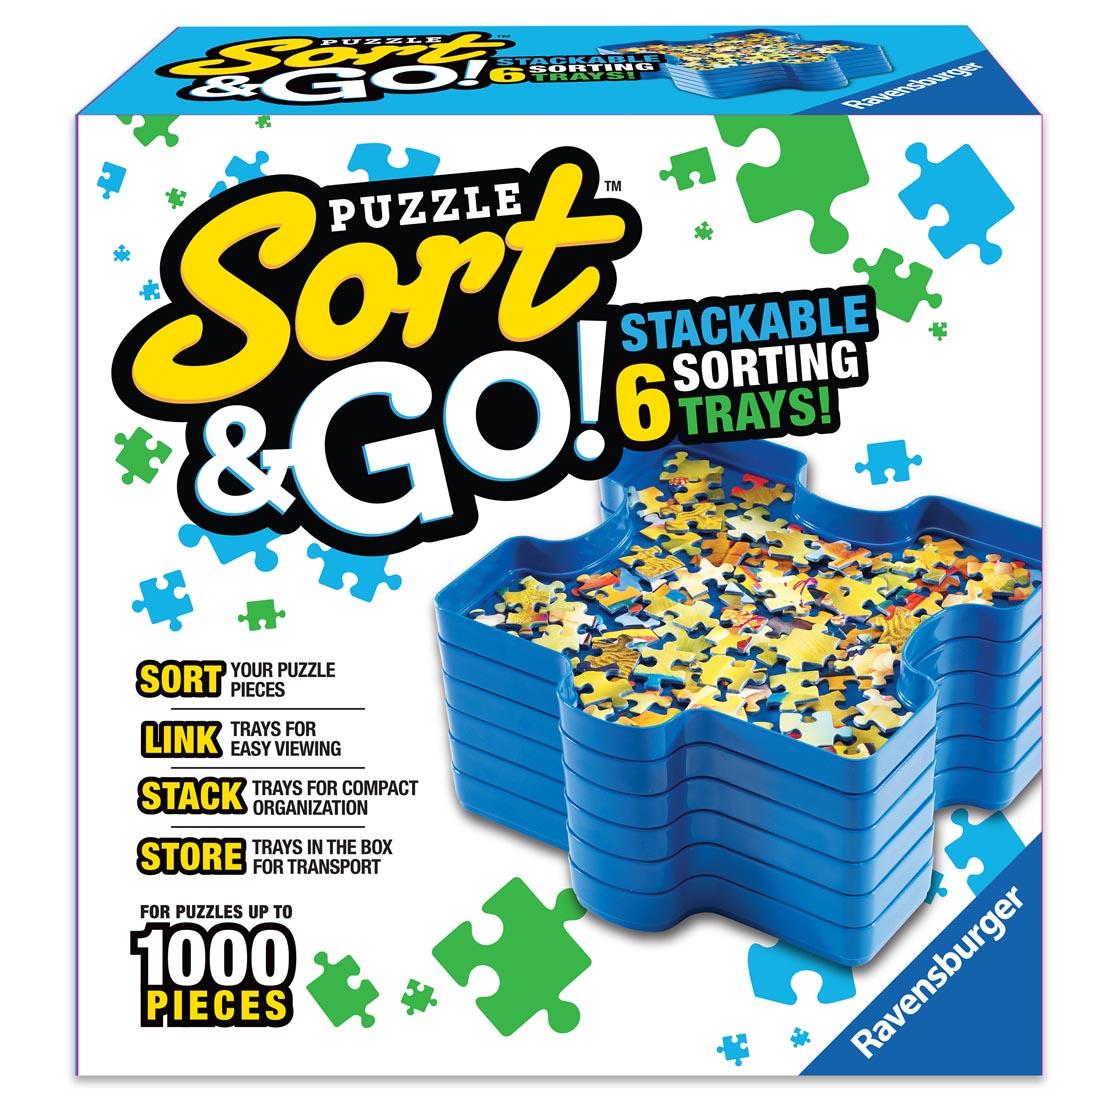 Puzzle Sort & Go! Stackable Sorting Trays by Ravensburger